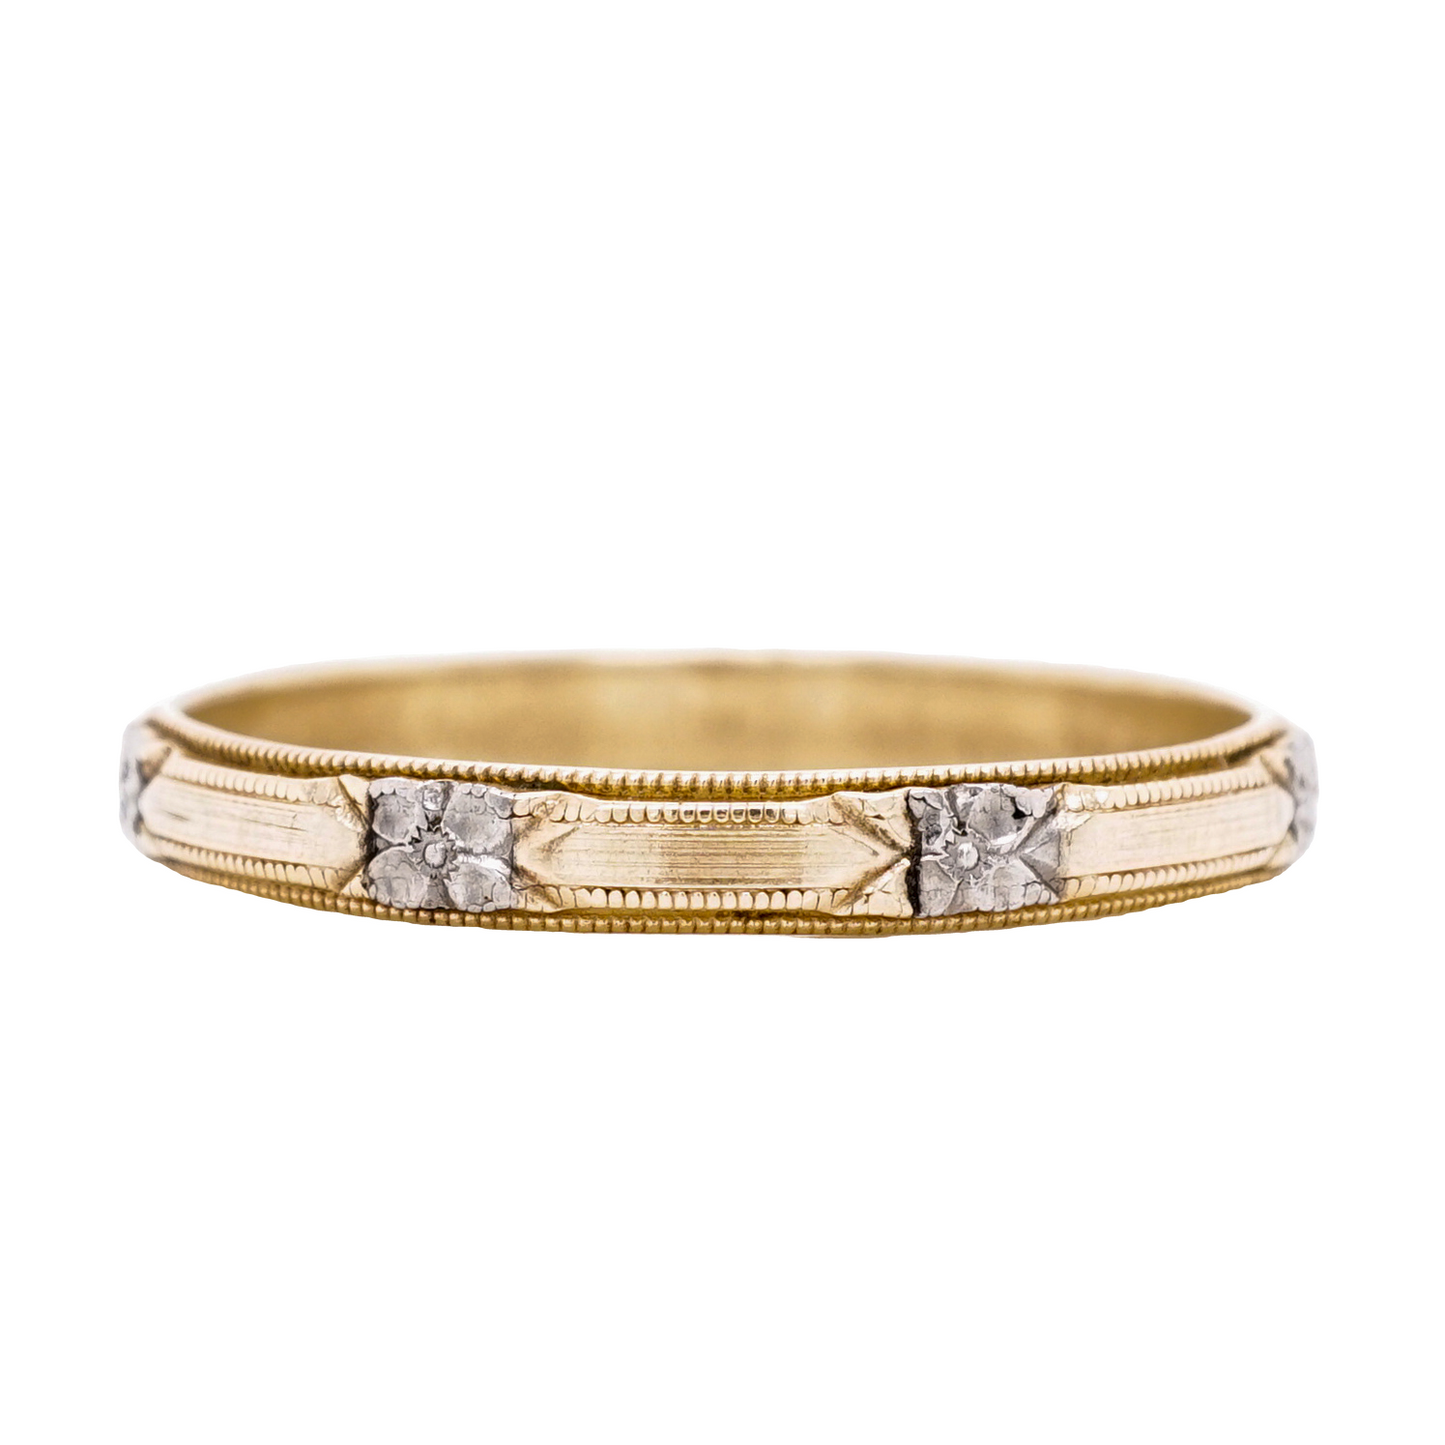 3mm Art Deco Two-Tone Engraved Wedding Band in 14K